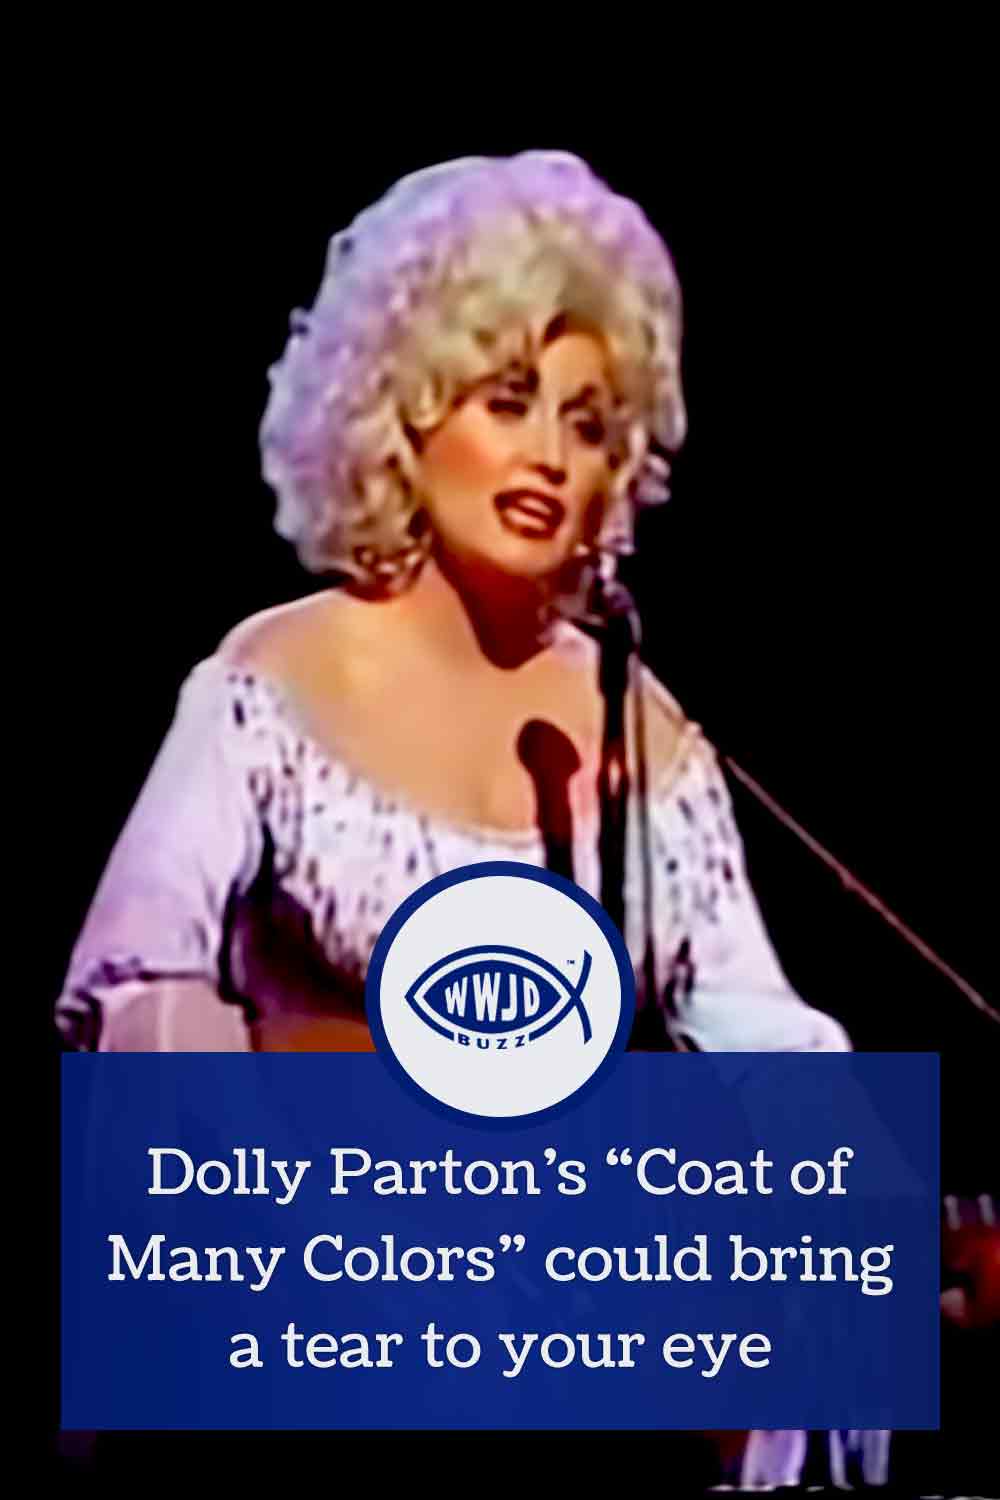 Dolly Parton’s “Coat of Many Colors” could bring a tear to your eye